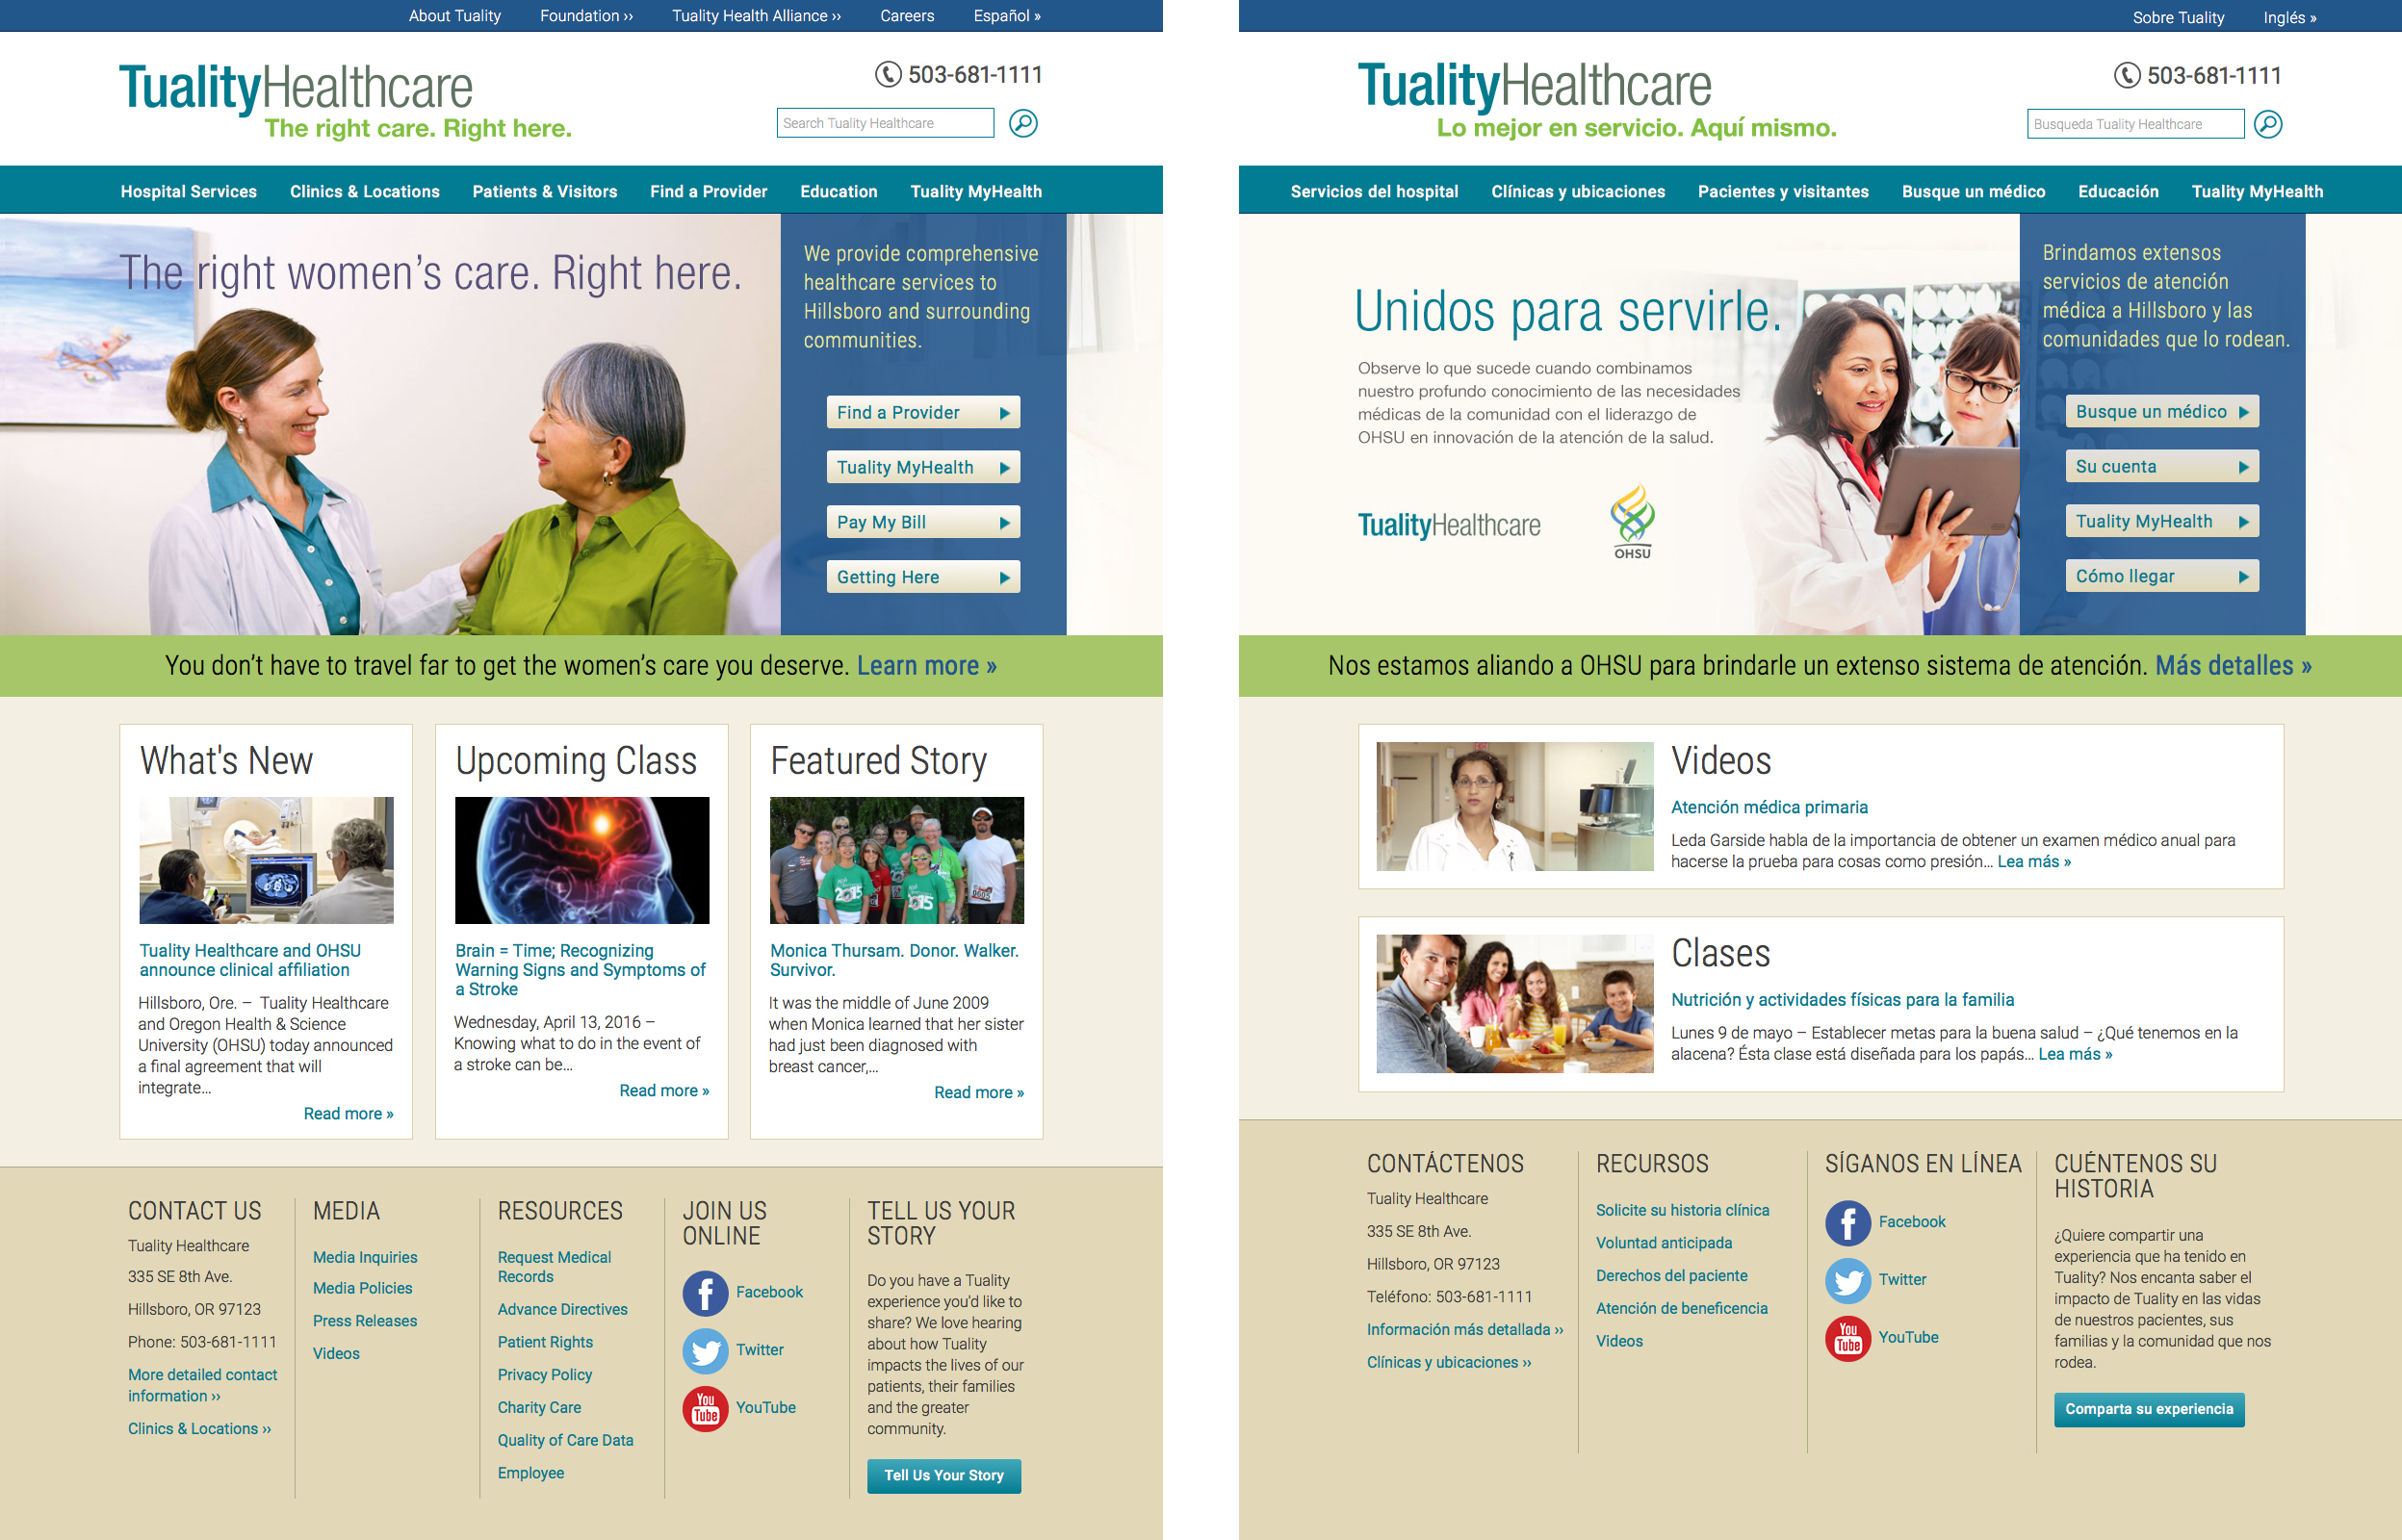 Tuality website homepages